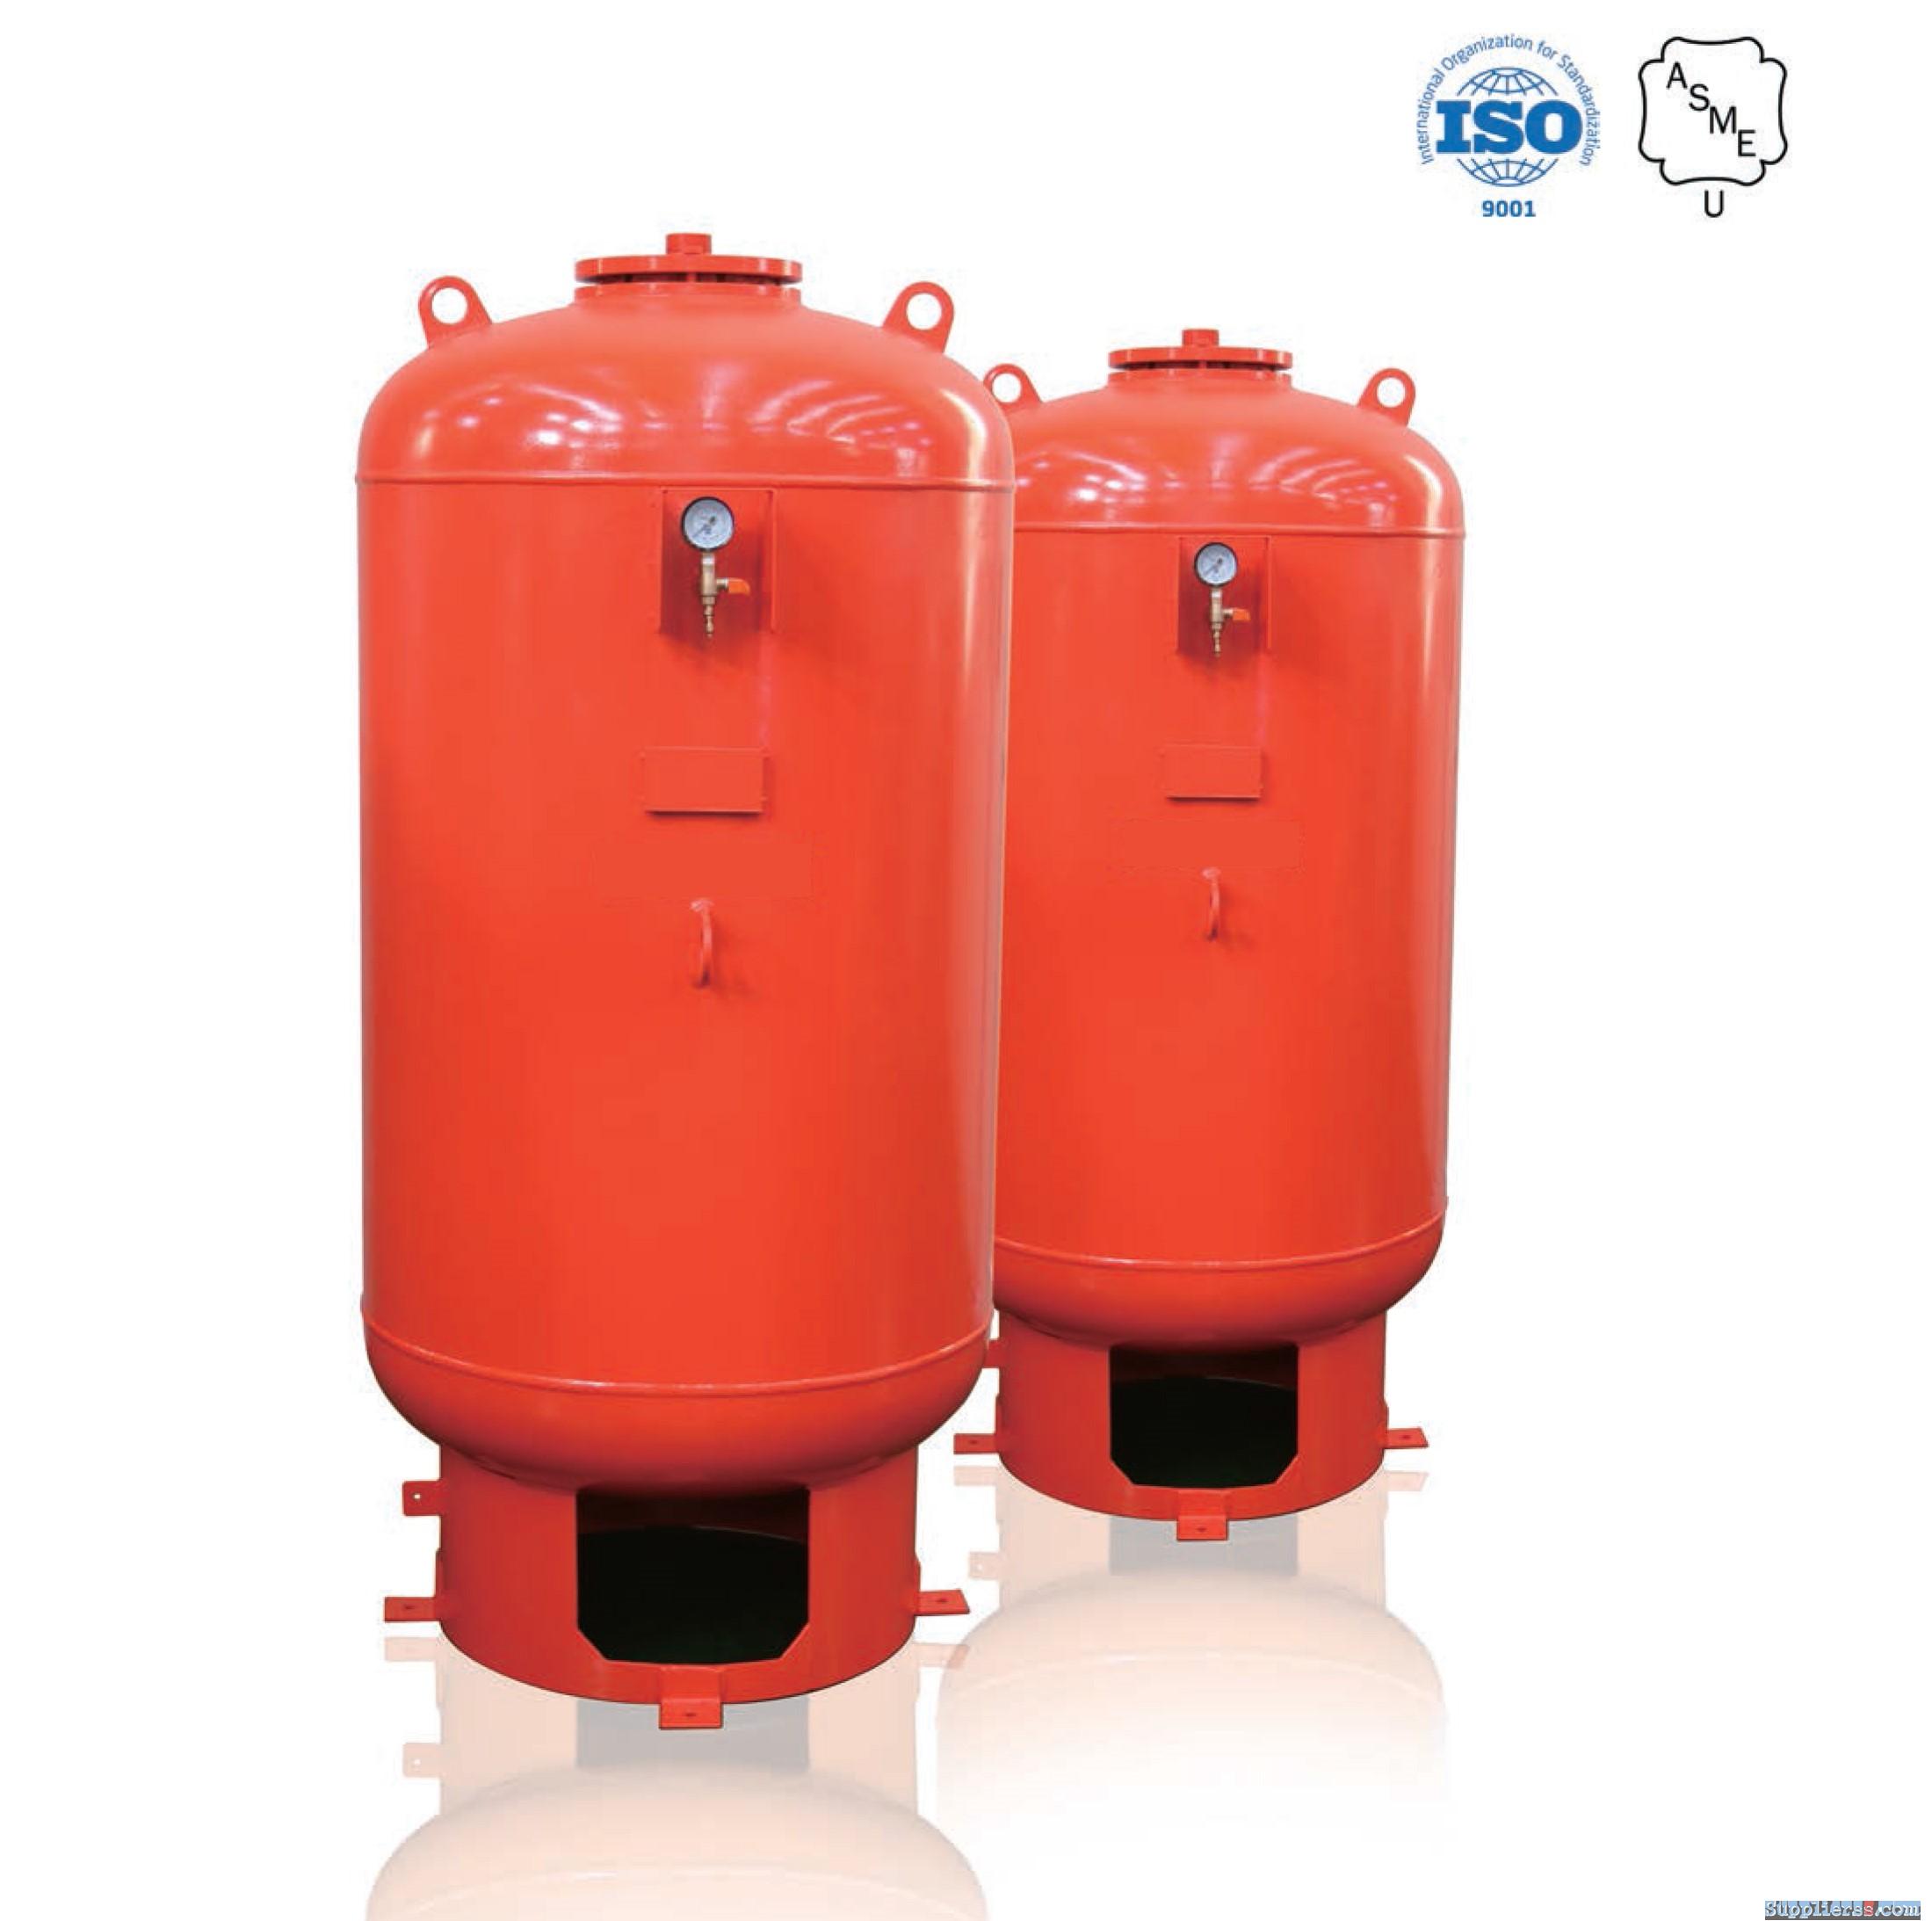 CLOSED EXPANSION TANK